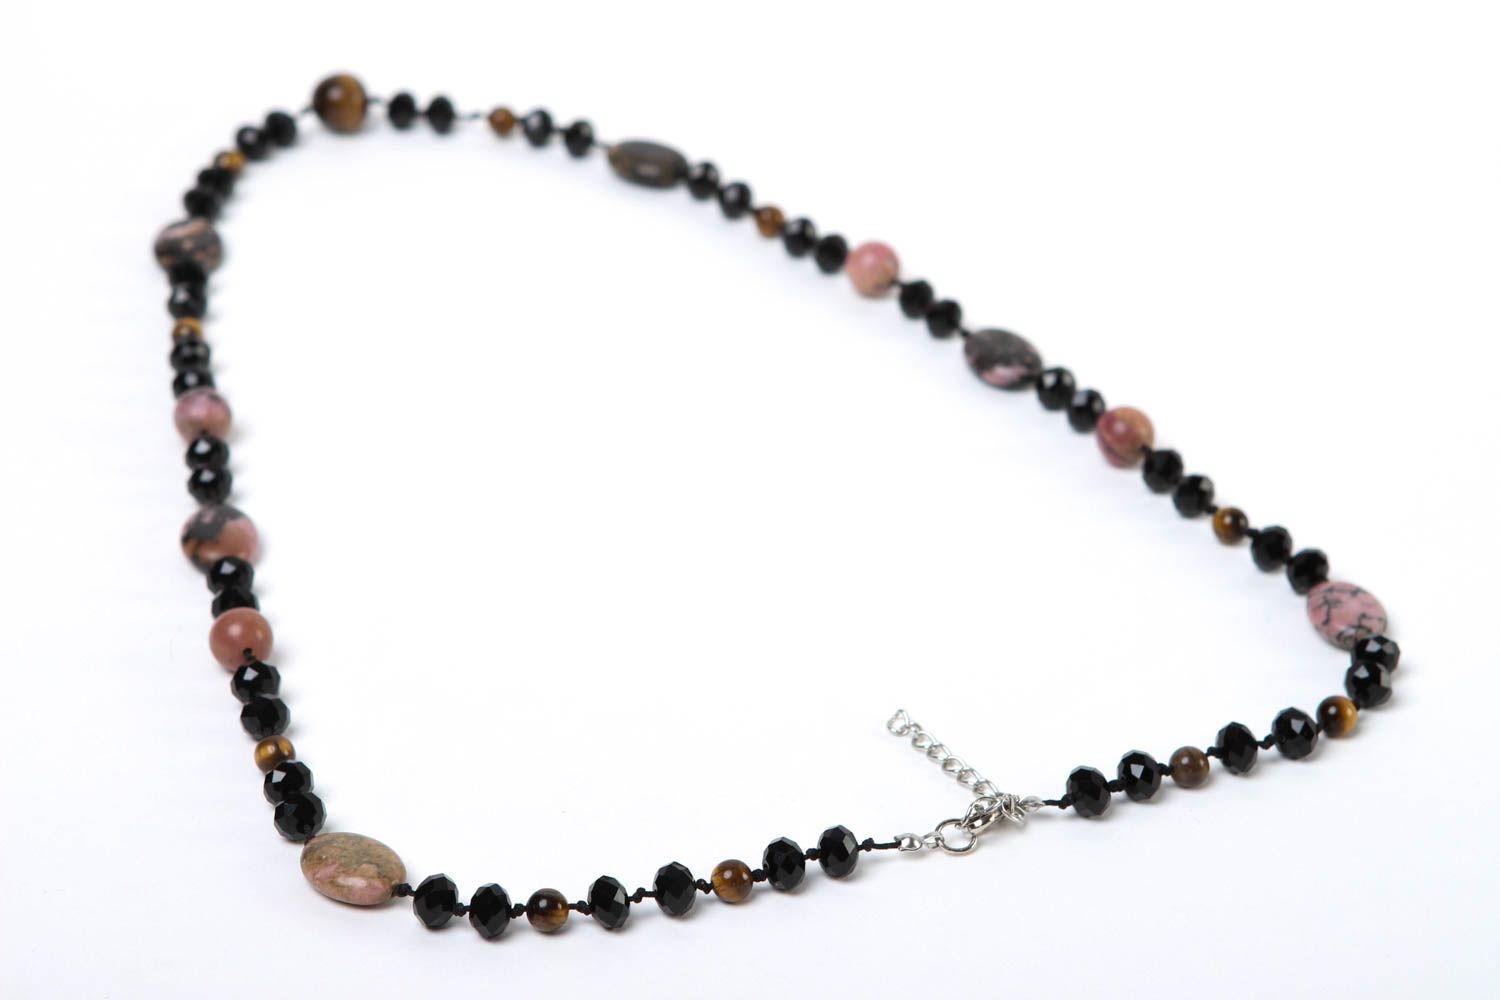 Bead necklace handmade long necklace gemstone jewelry fashion accessories photo 4